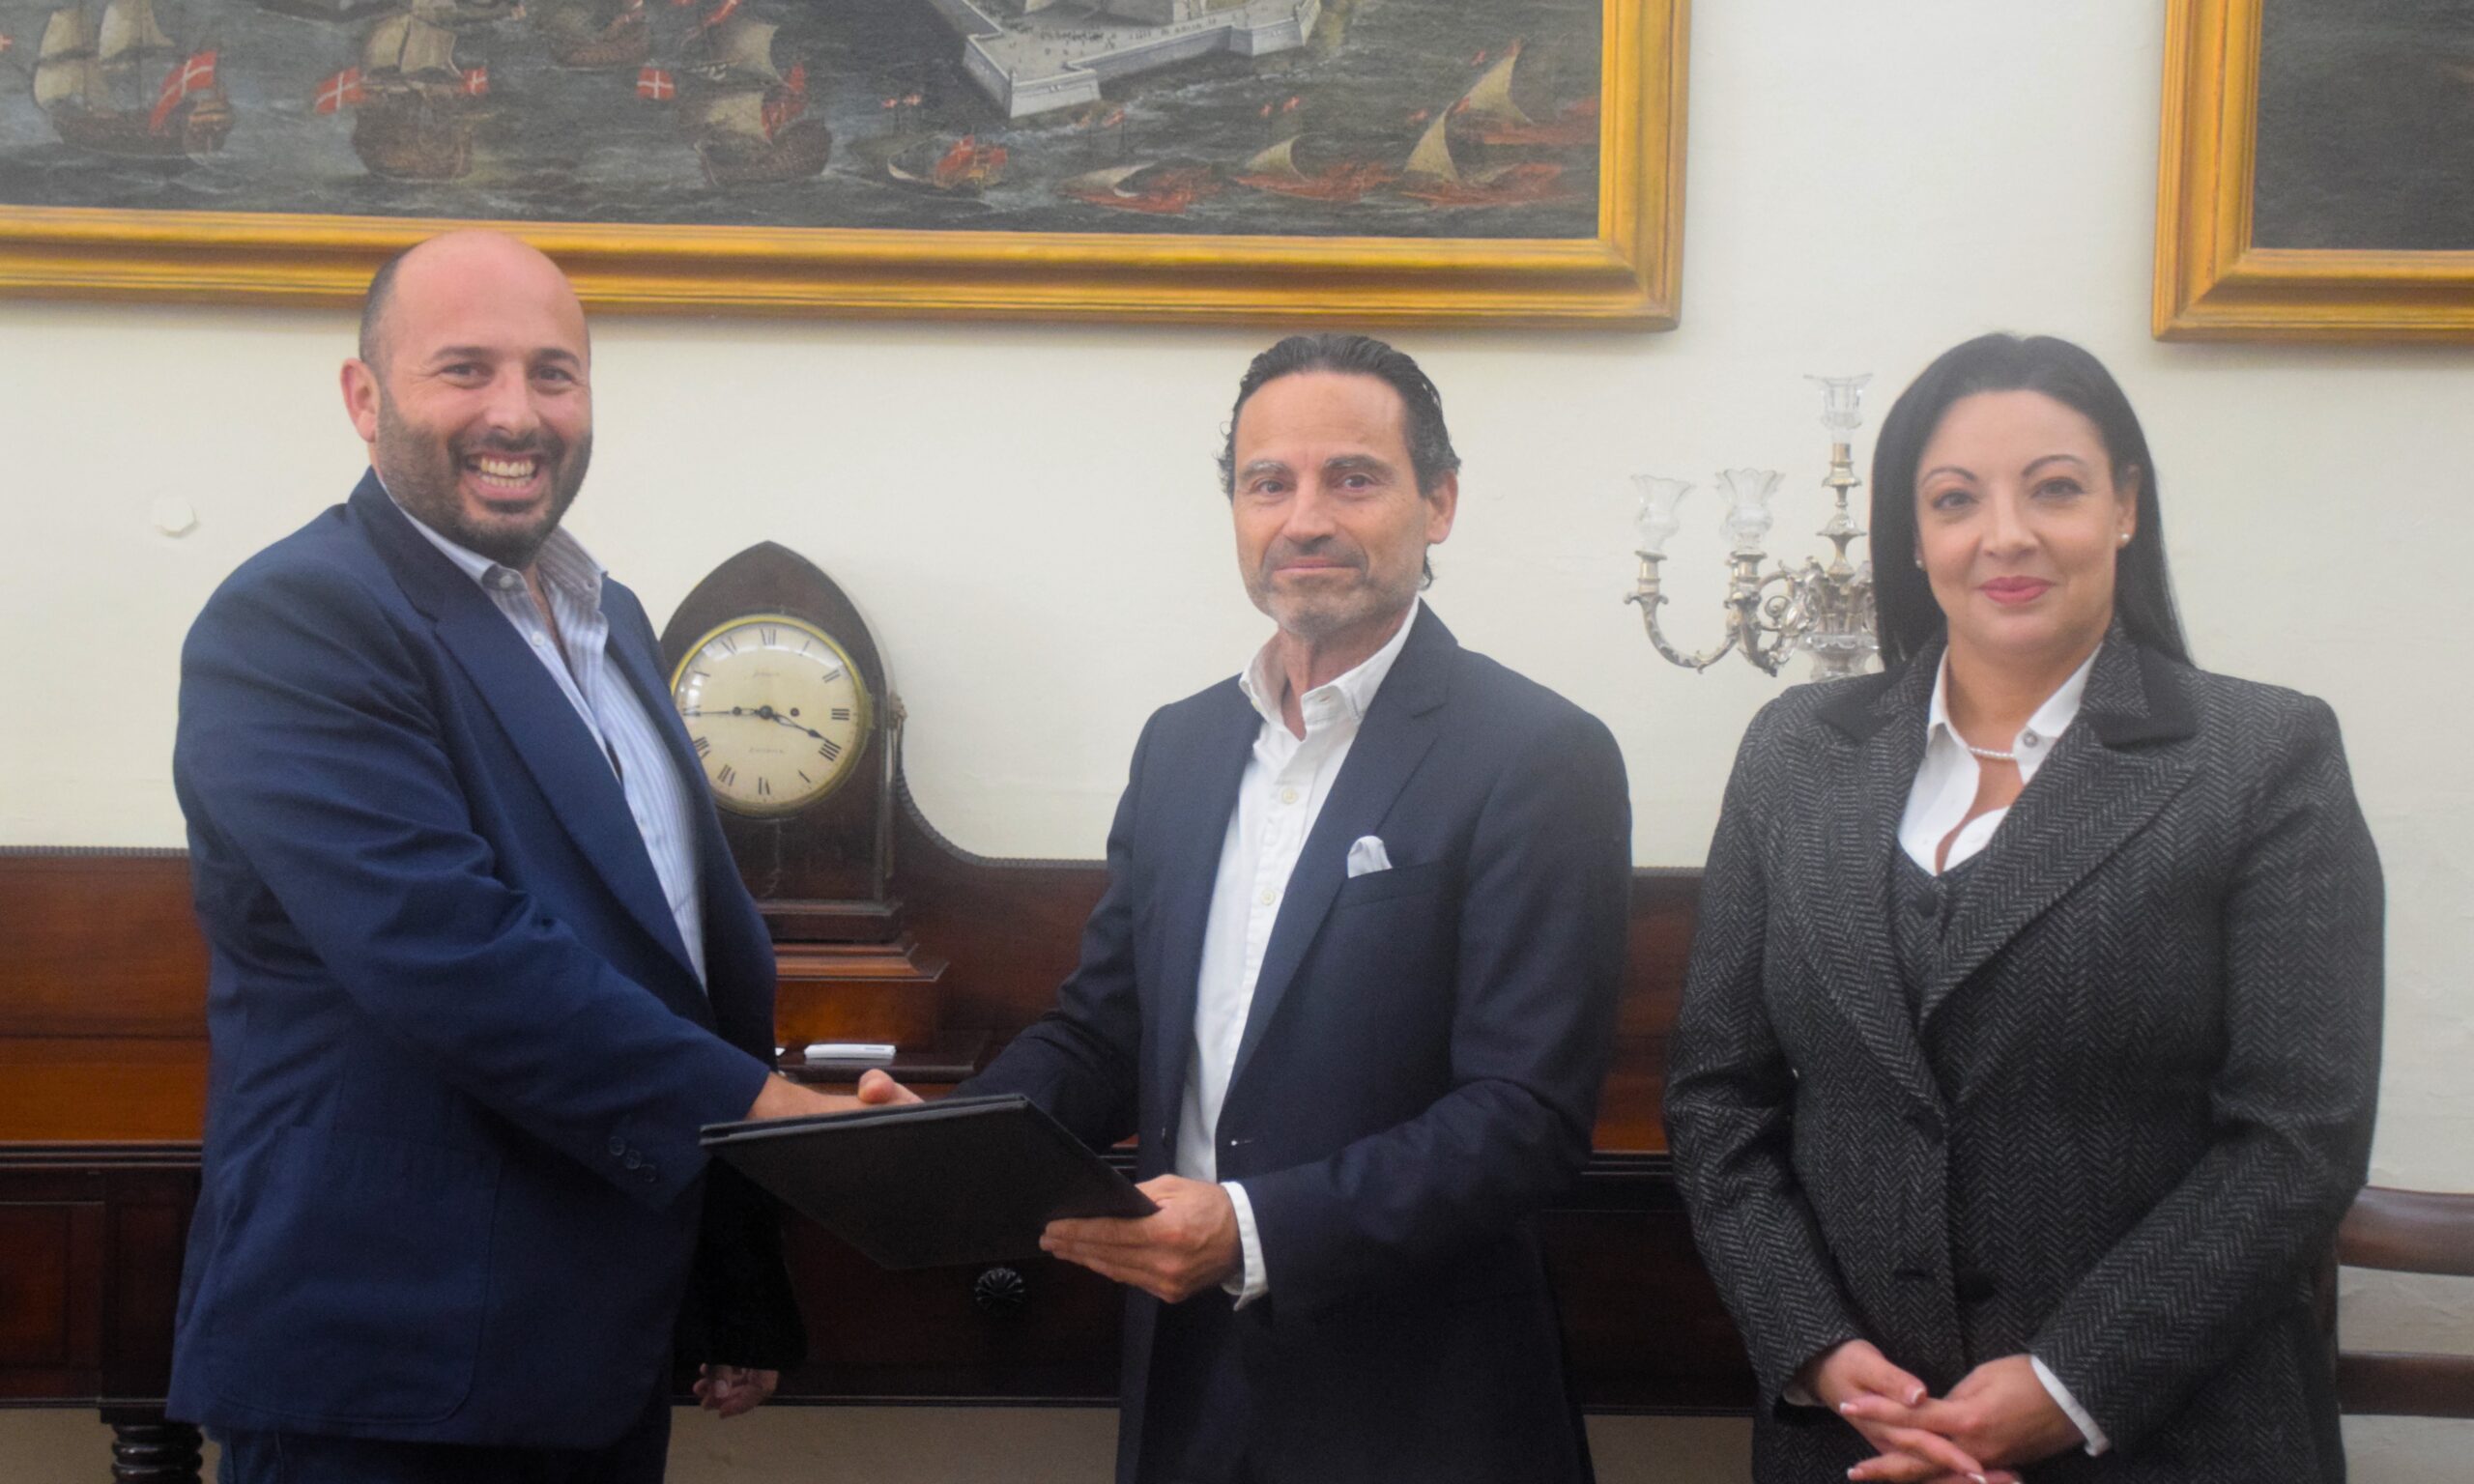 The Malta Chamber and Willingness Team sign agreement to promote wellbeing at the workplace